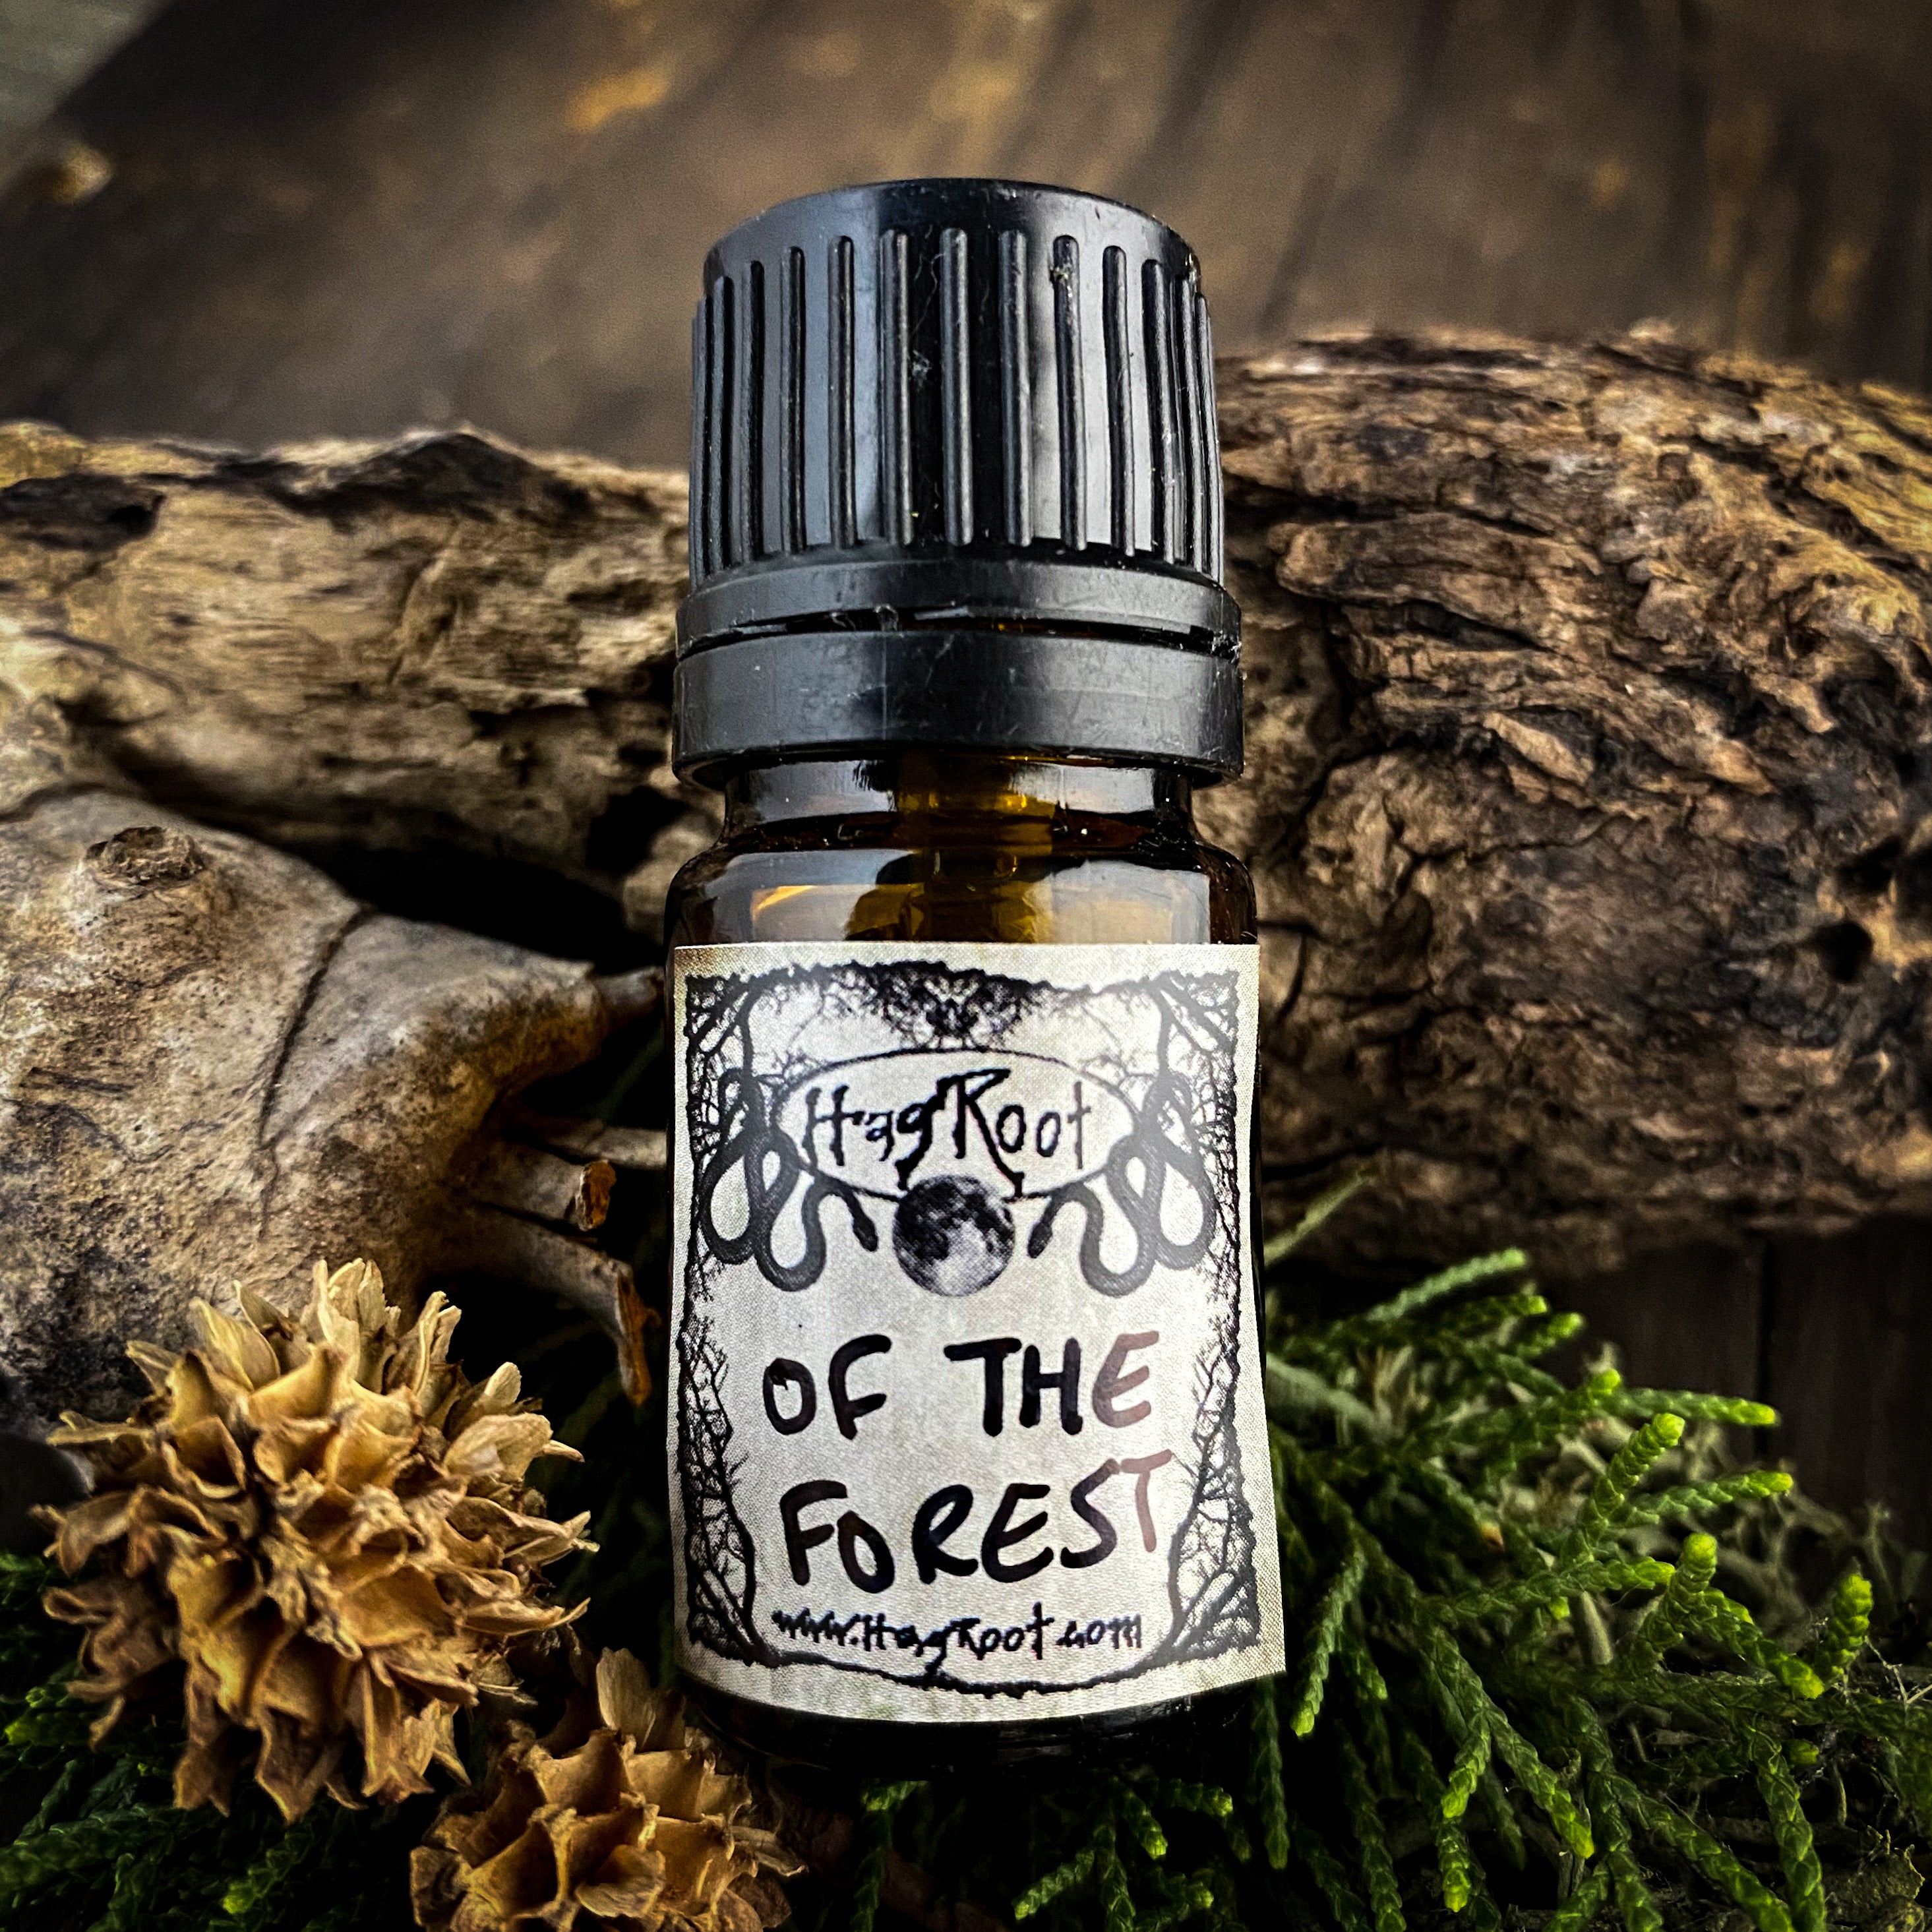 OF THE FOREST-(Ancient Evergreens, Forest Moss, Tree Sap, Bonfires and Wild Ferns)-Perfume, Cologne, Anointing, Ritual Oil